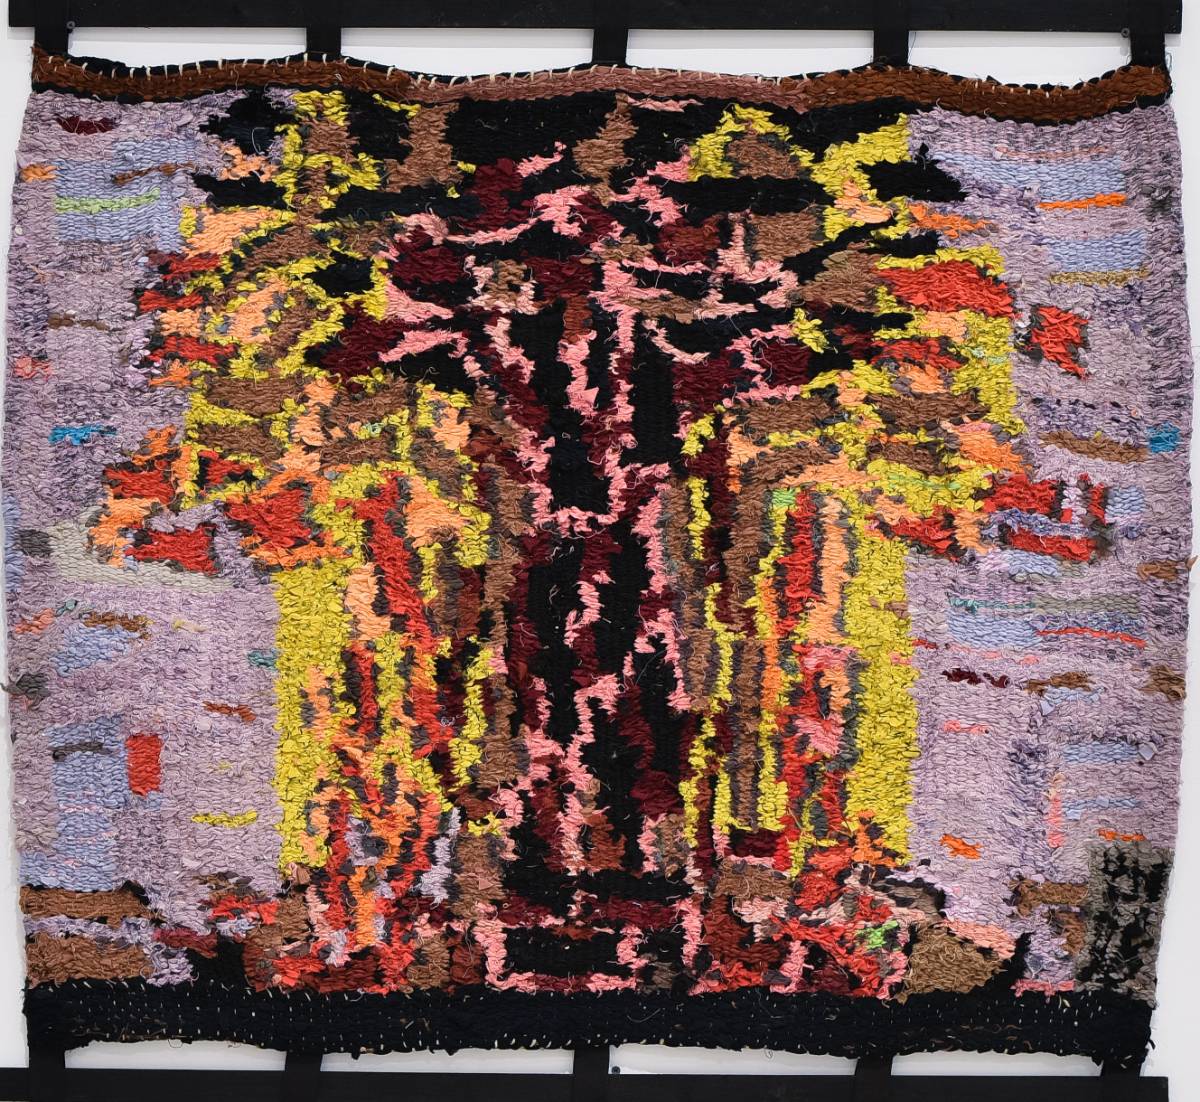 The tree, tapestry, 87x105cm, 1998